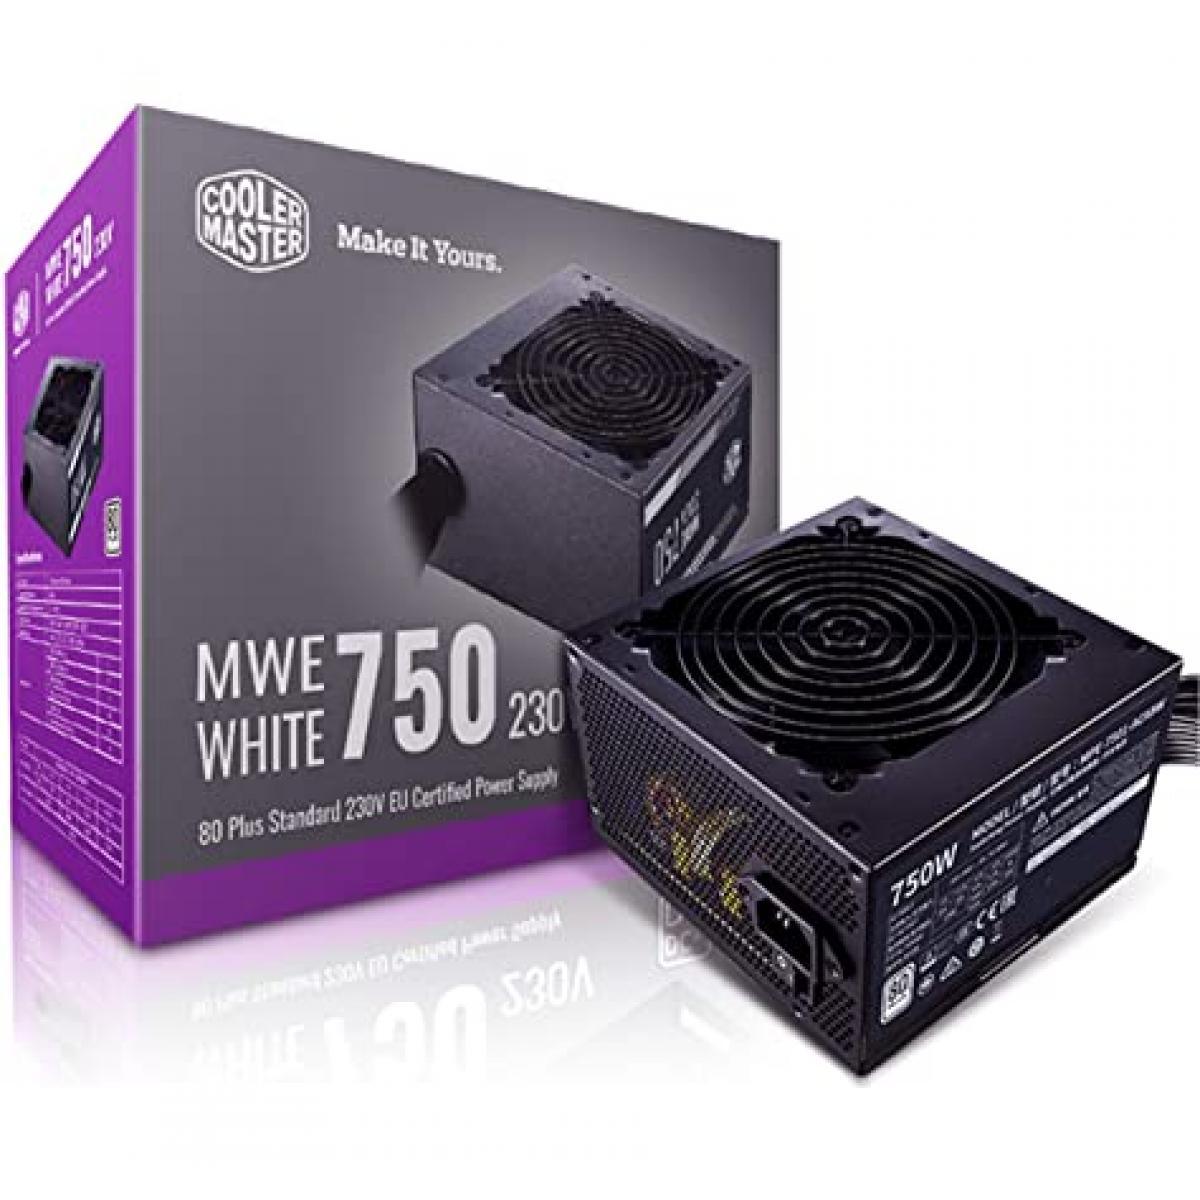 COOLER MASTER POWER SUPPLY Cooler Master MWE 750 750w 80 PLUS White 80+ Certification Power Supply